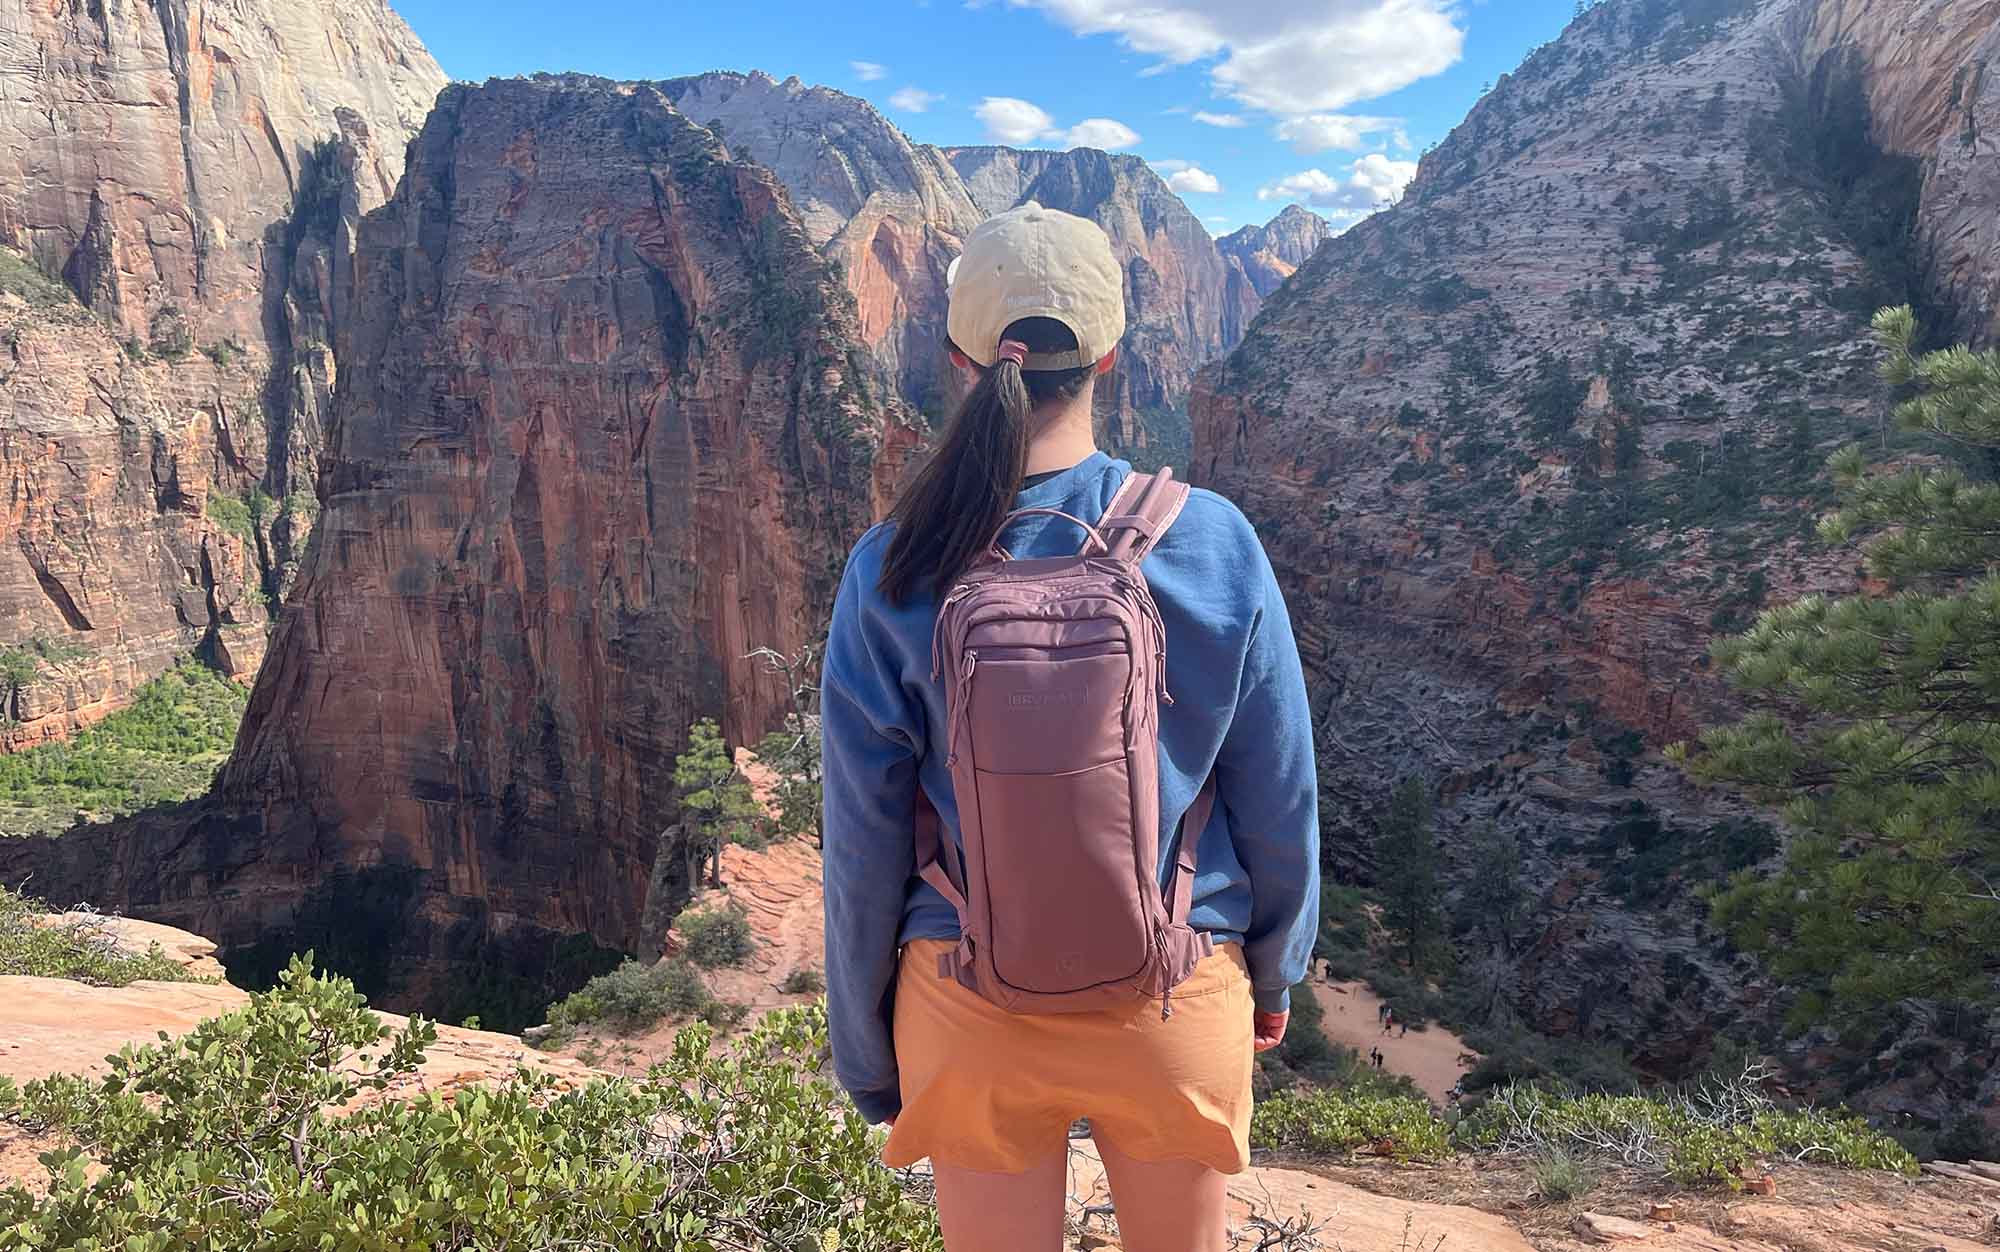 We tested the Brumate Paragon in Zion NP.